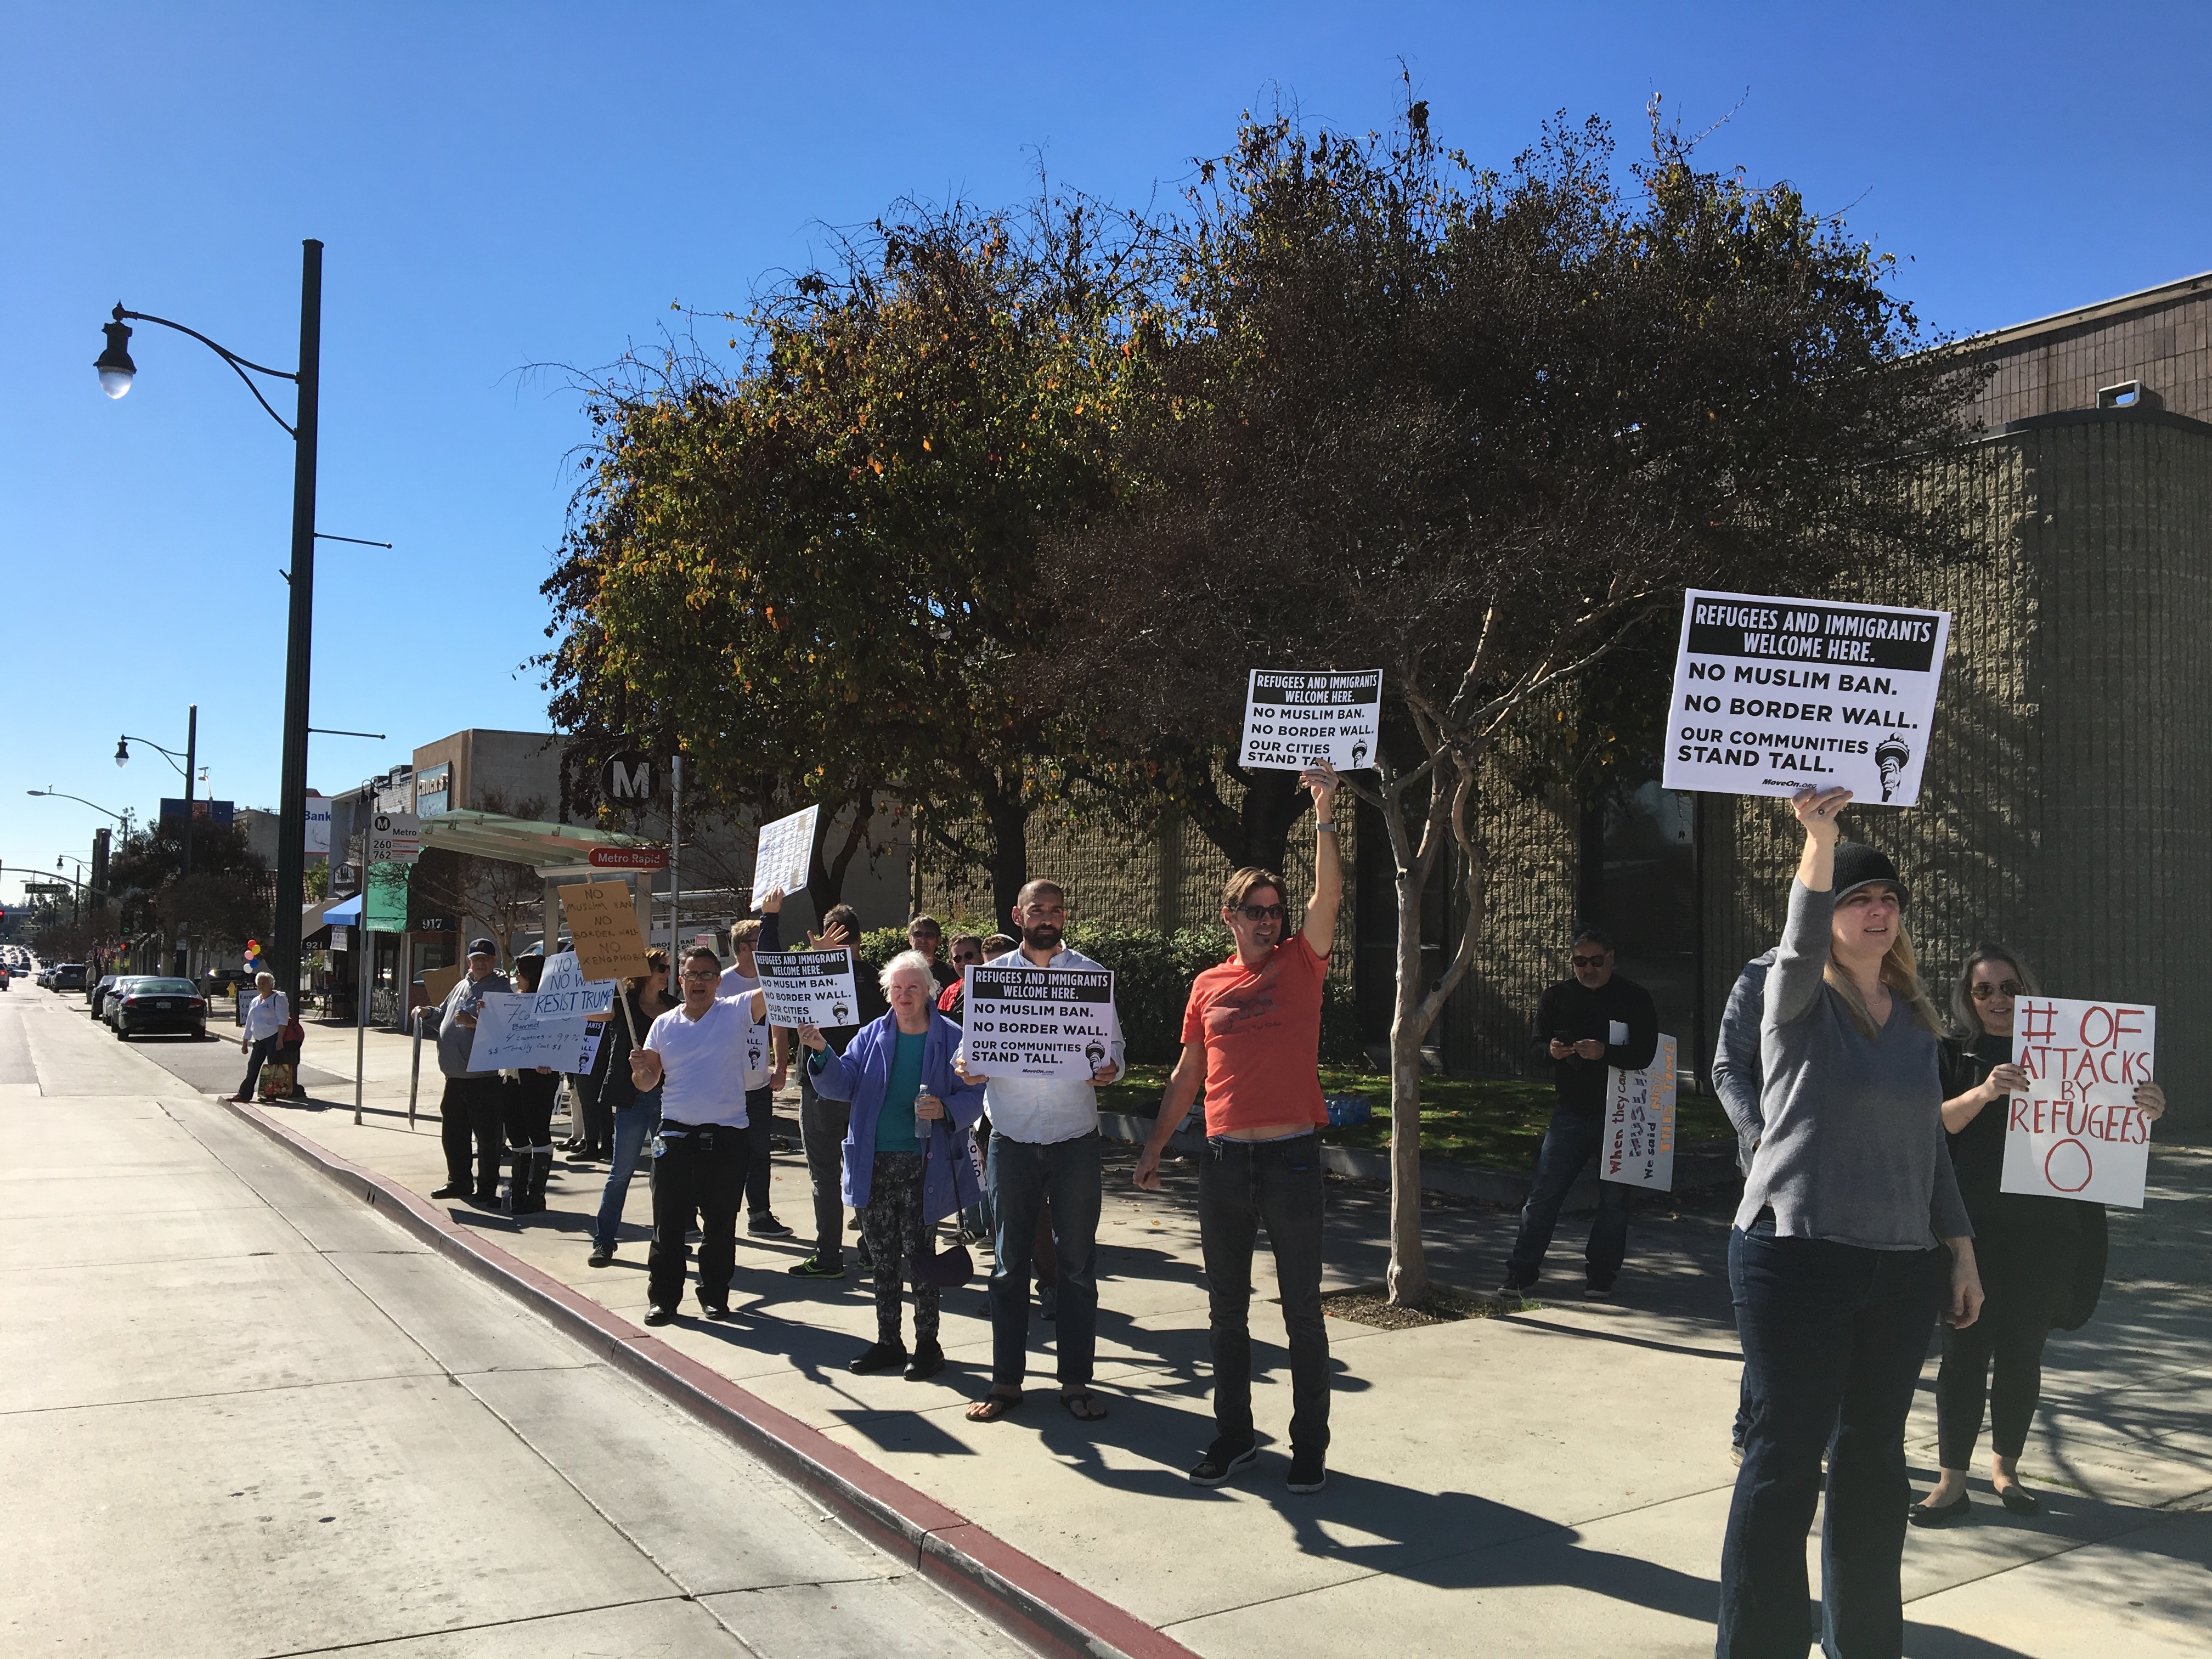 Thumbnail for Progressive Folks of South Pasadena holds protest following executive order on immigration